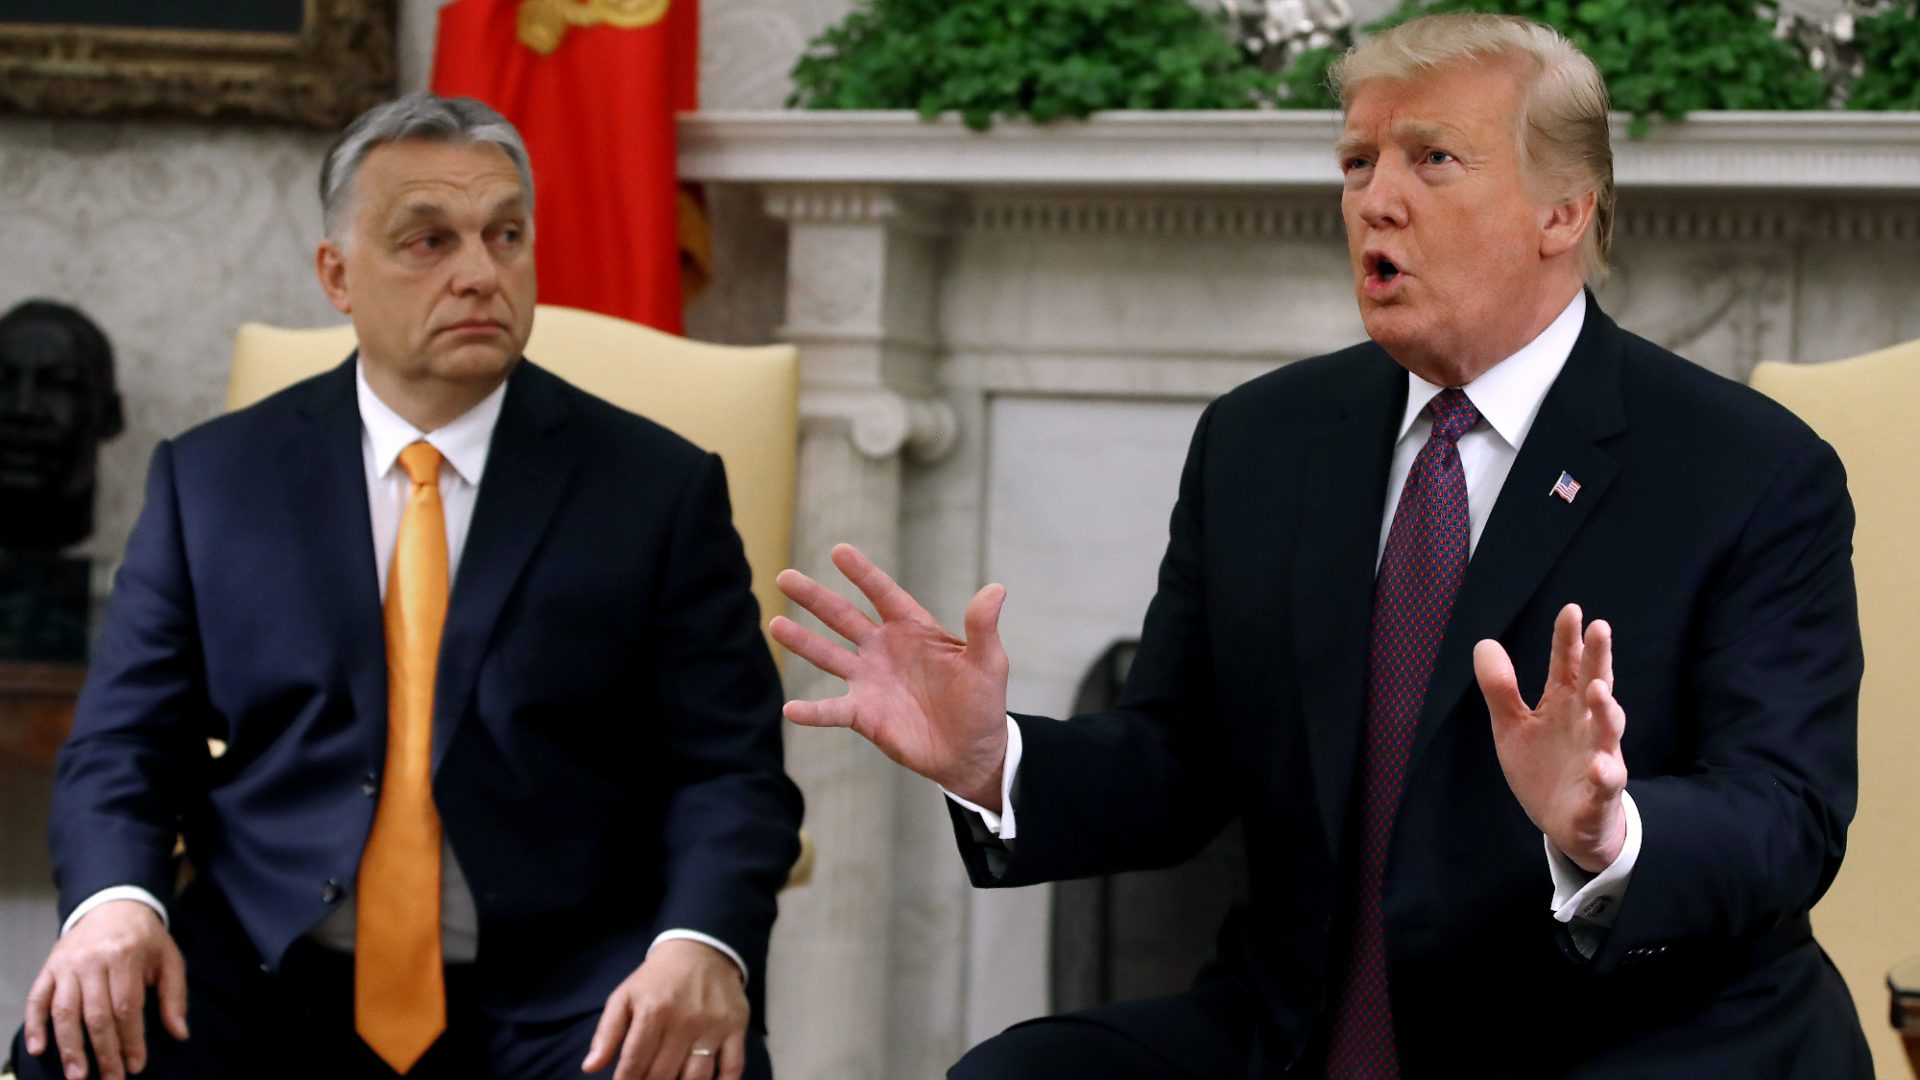 Hungarian prime minister Viktor Orbán and Donald Trump take each other as role models and send one another messages of support. Photo: Mark Wilson/Getty